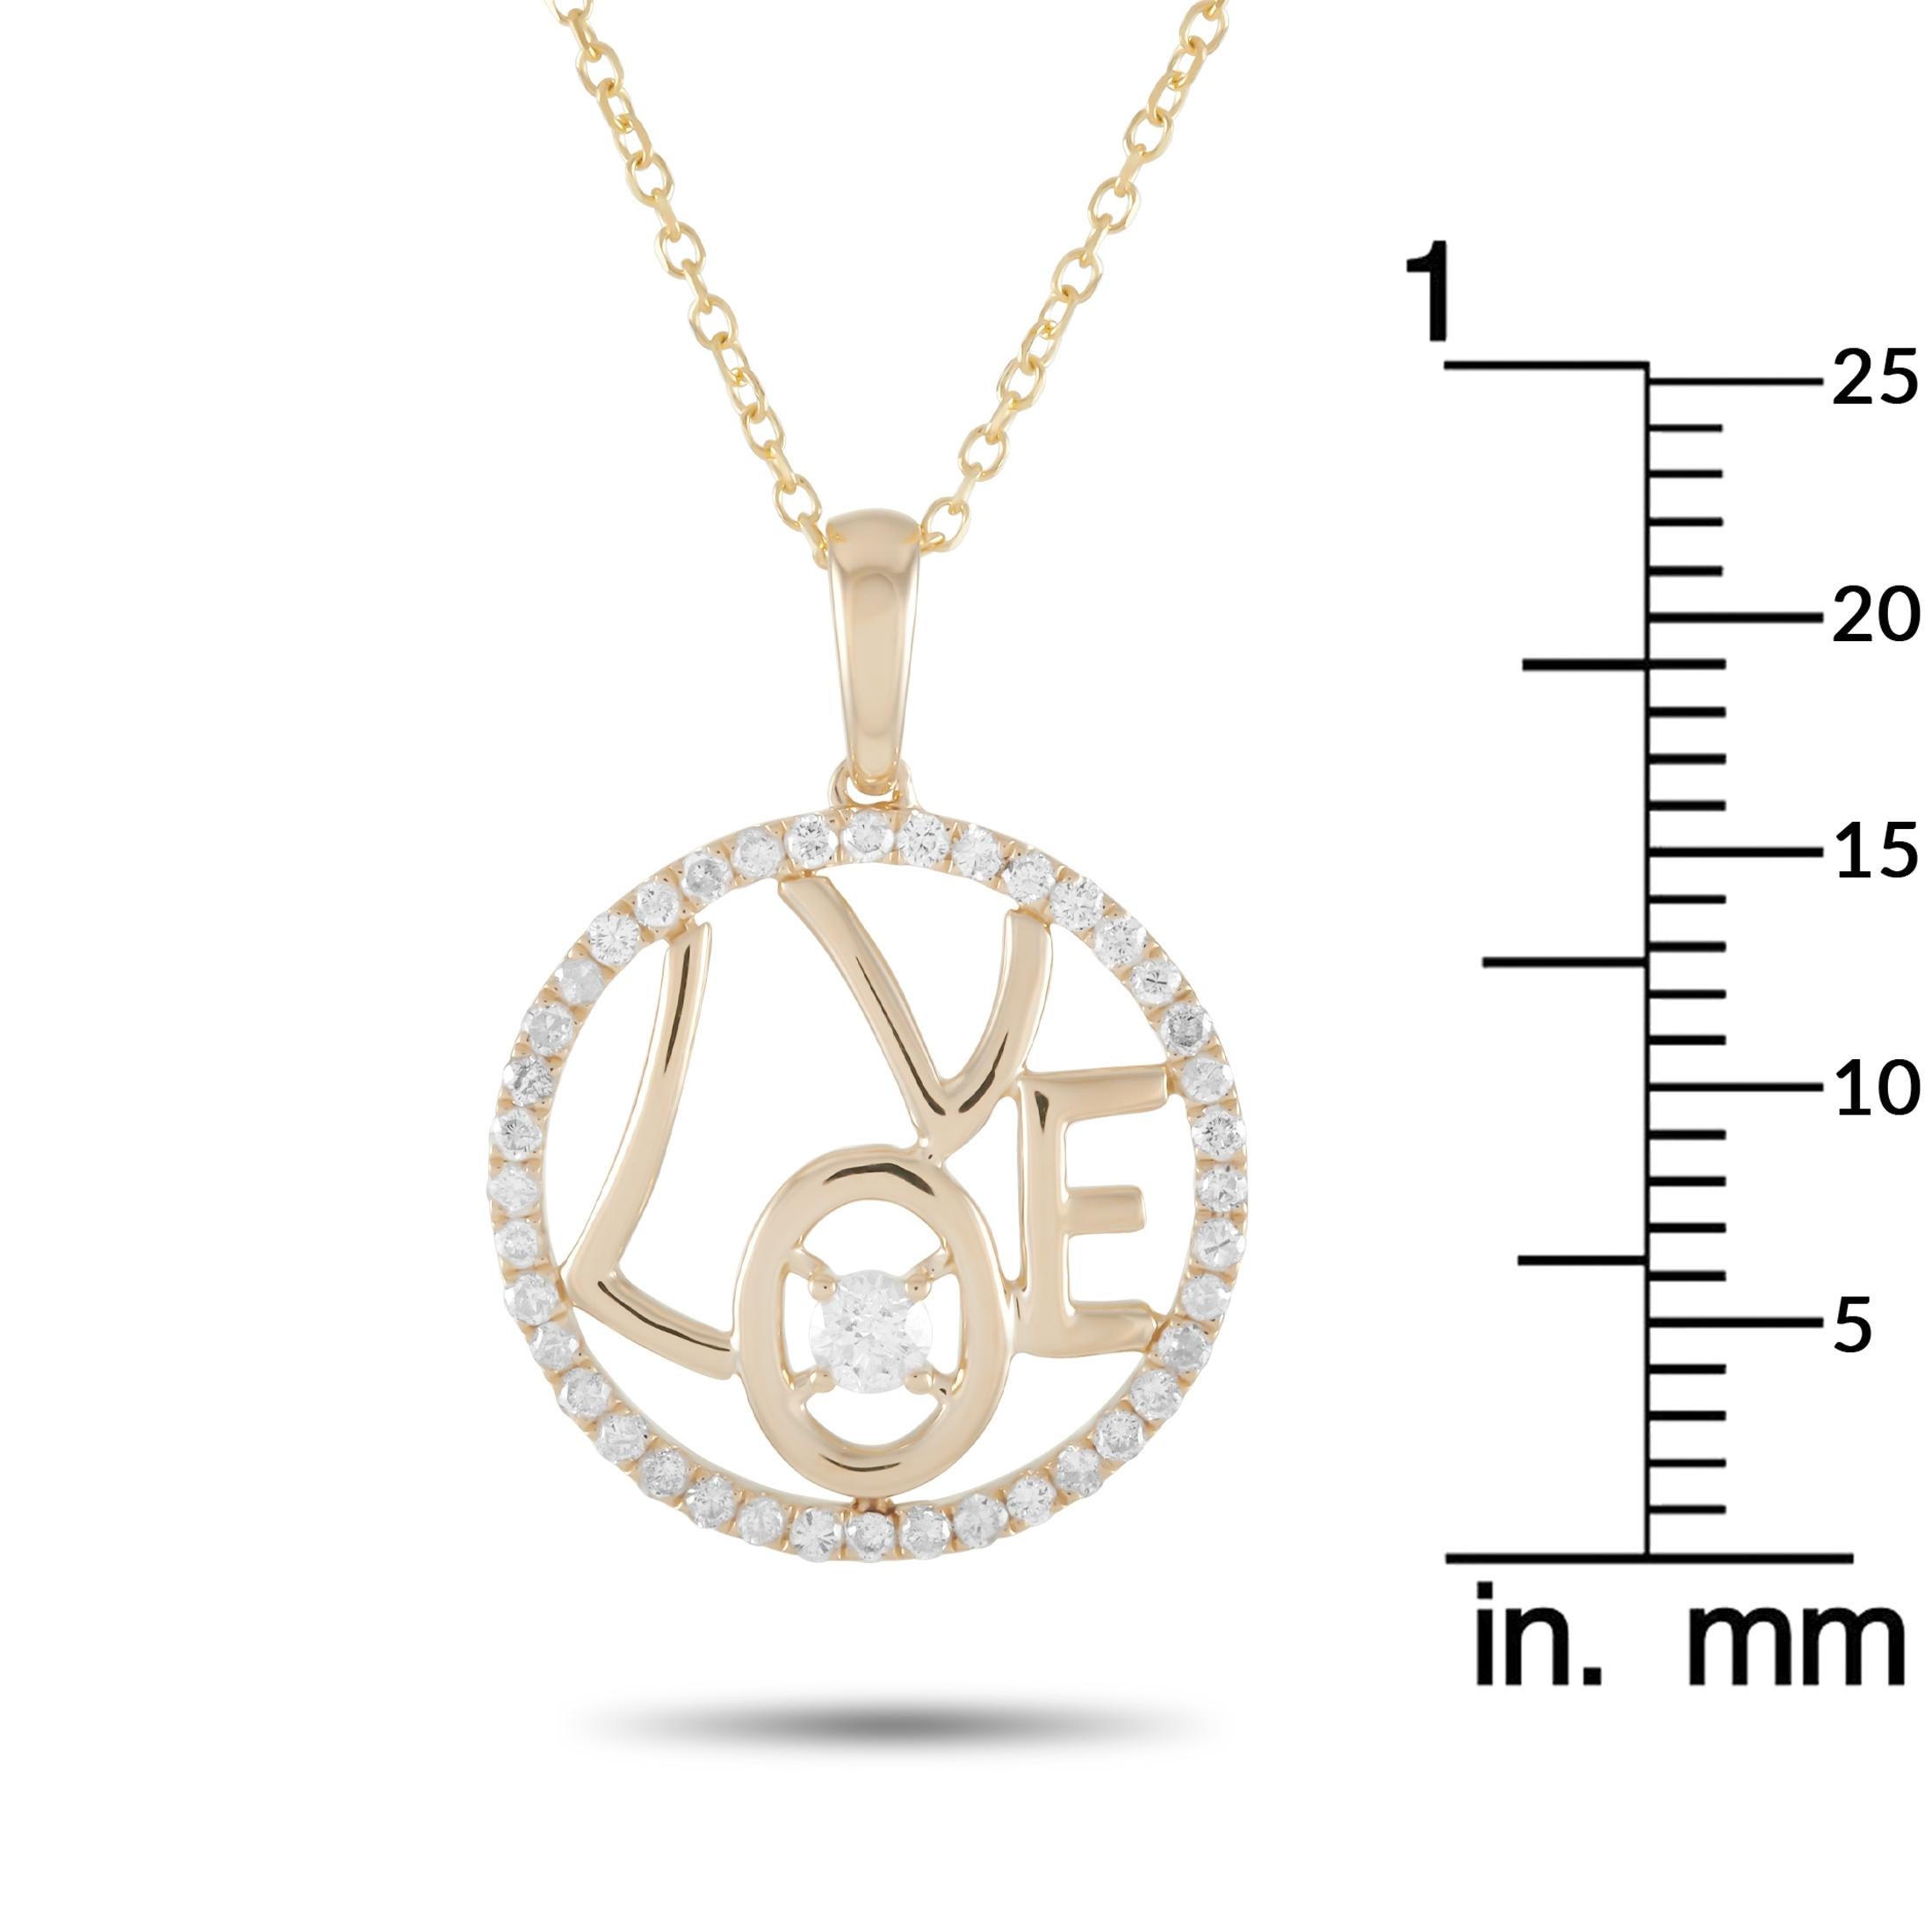 LB Exclusive 14 Karat Yellow Gold 0.30 Carat Diamond Pendant Necklace In New Condition For Sale In Southampton, PA